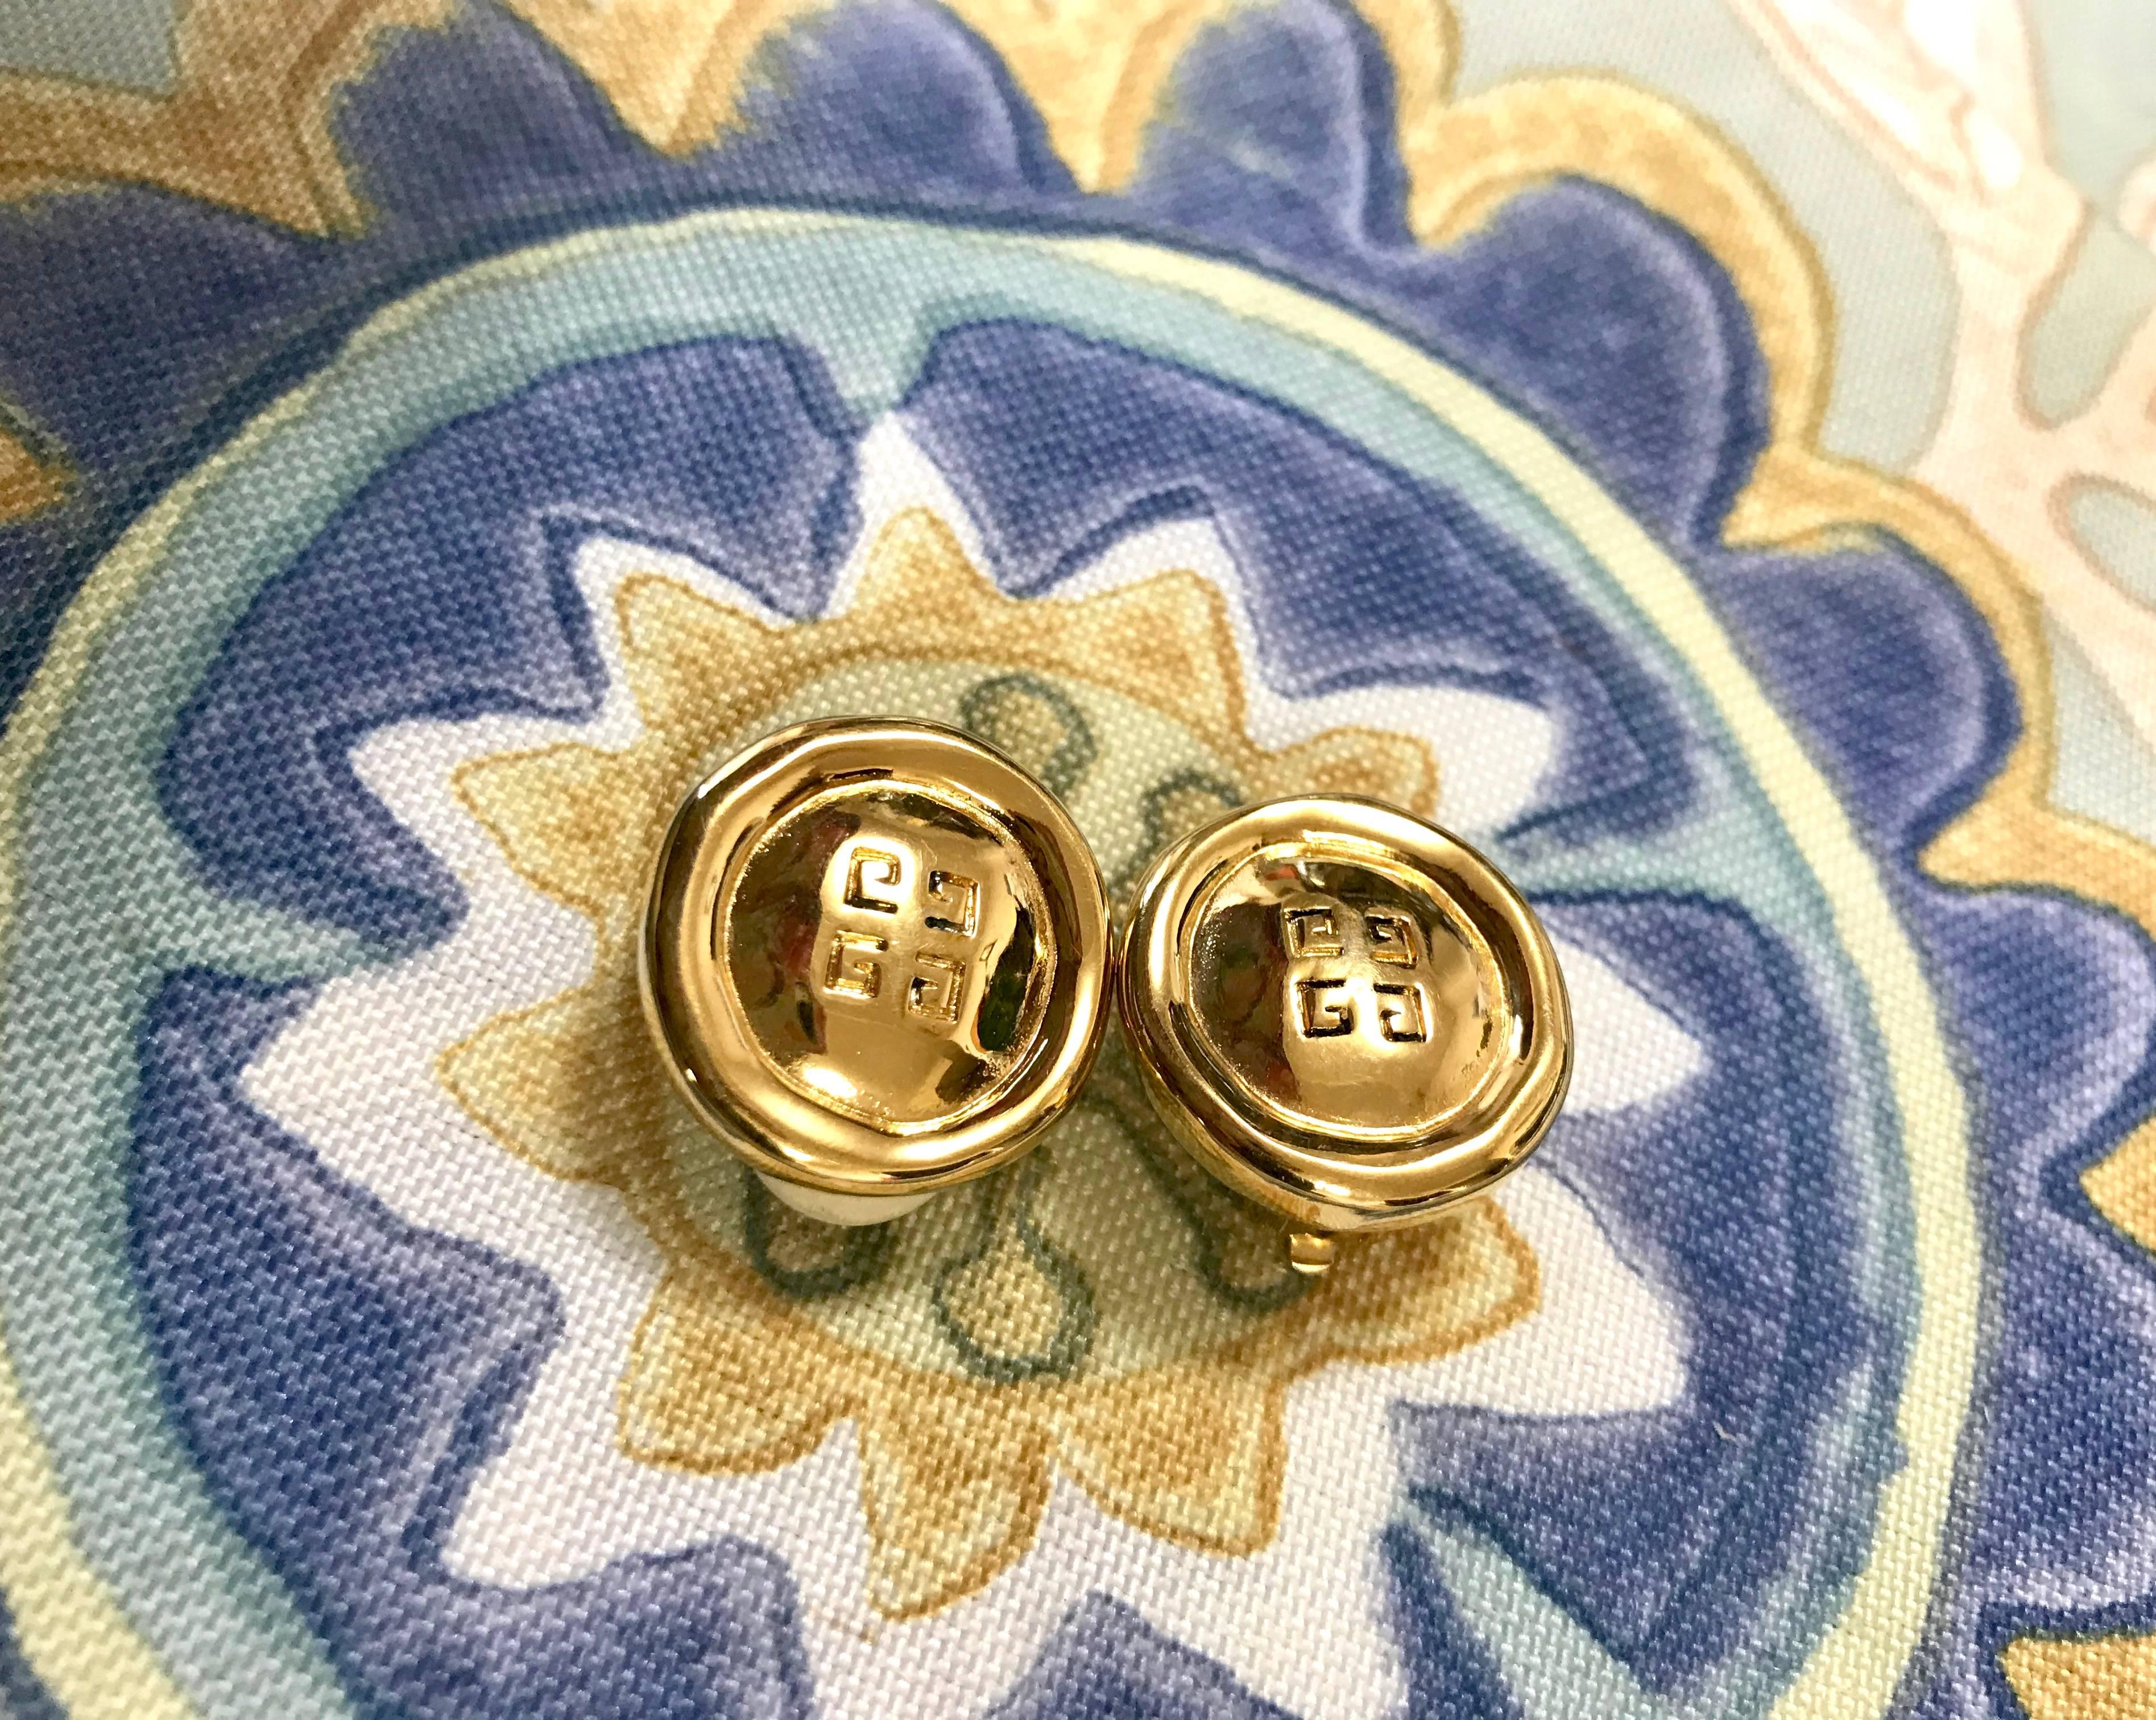 1990s. Vintage Givenchy golden round shape earrings with embossed logo mark. Classic jewelry piece.
Introducing  a vintage GIVENCHY golden round earrings with enbossed logo mark.

Classic and beautiful jewelry piece from GIVENCHY back in the 90's.